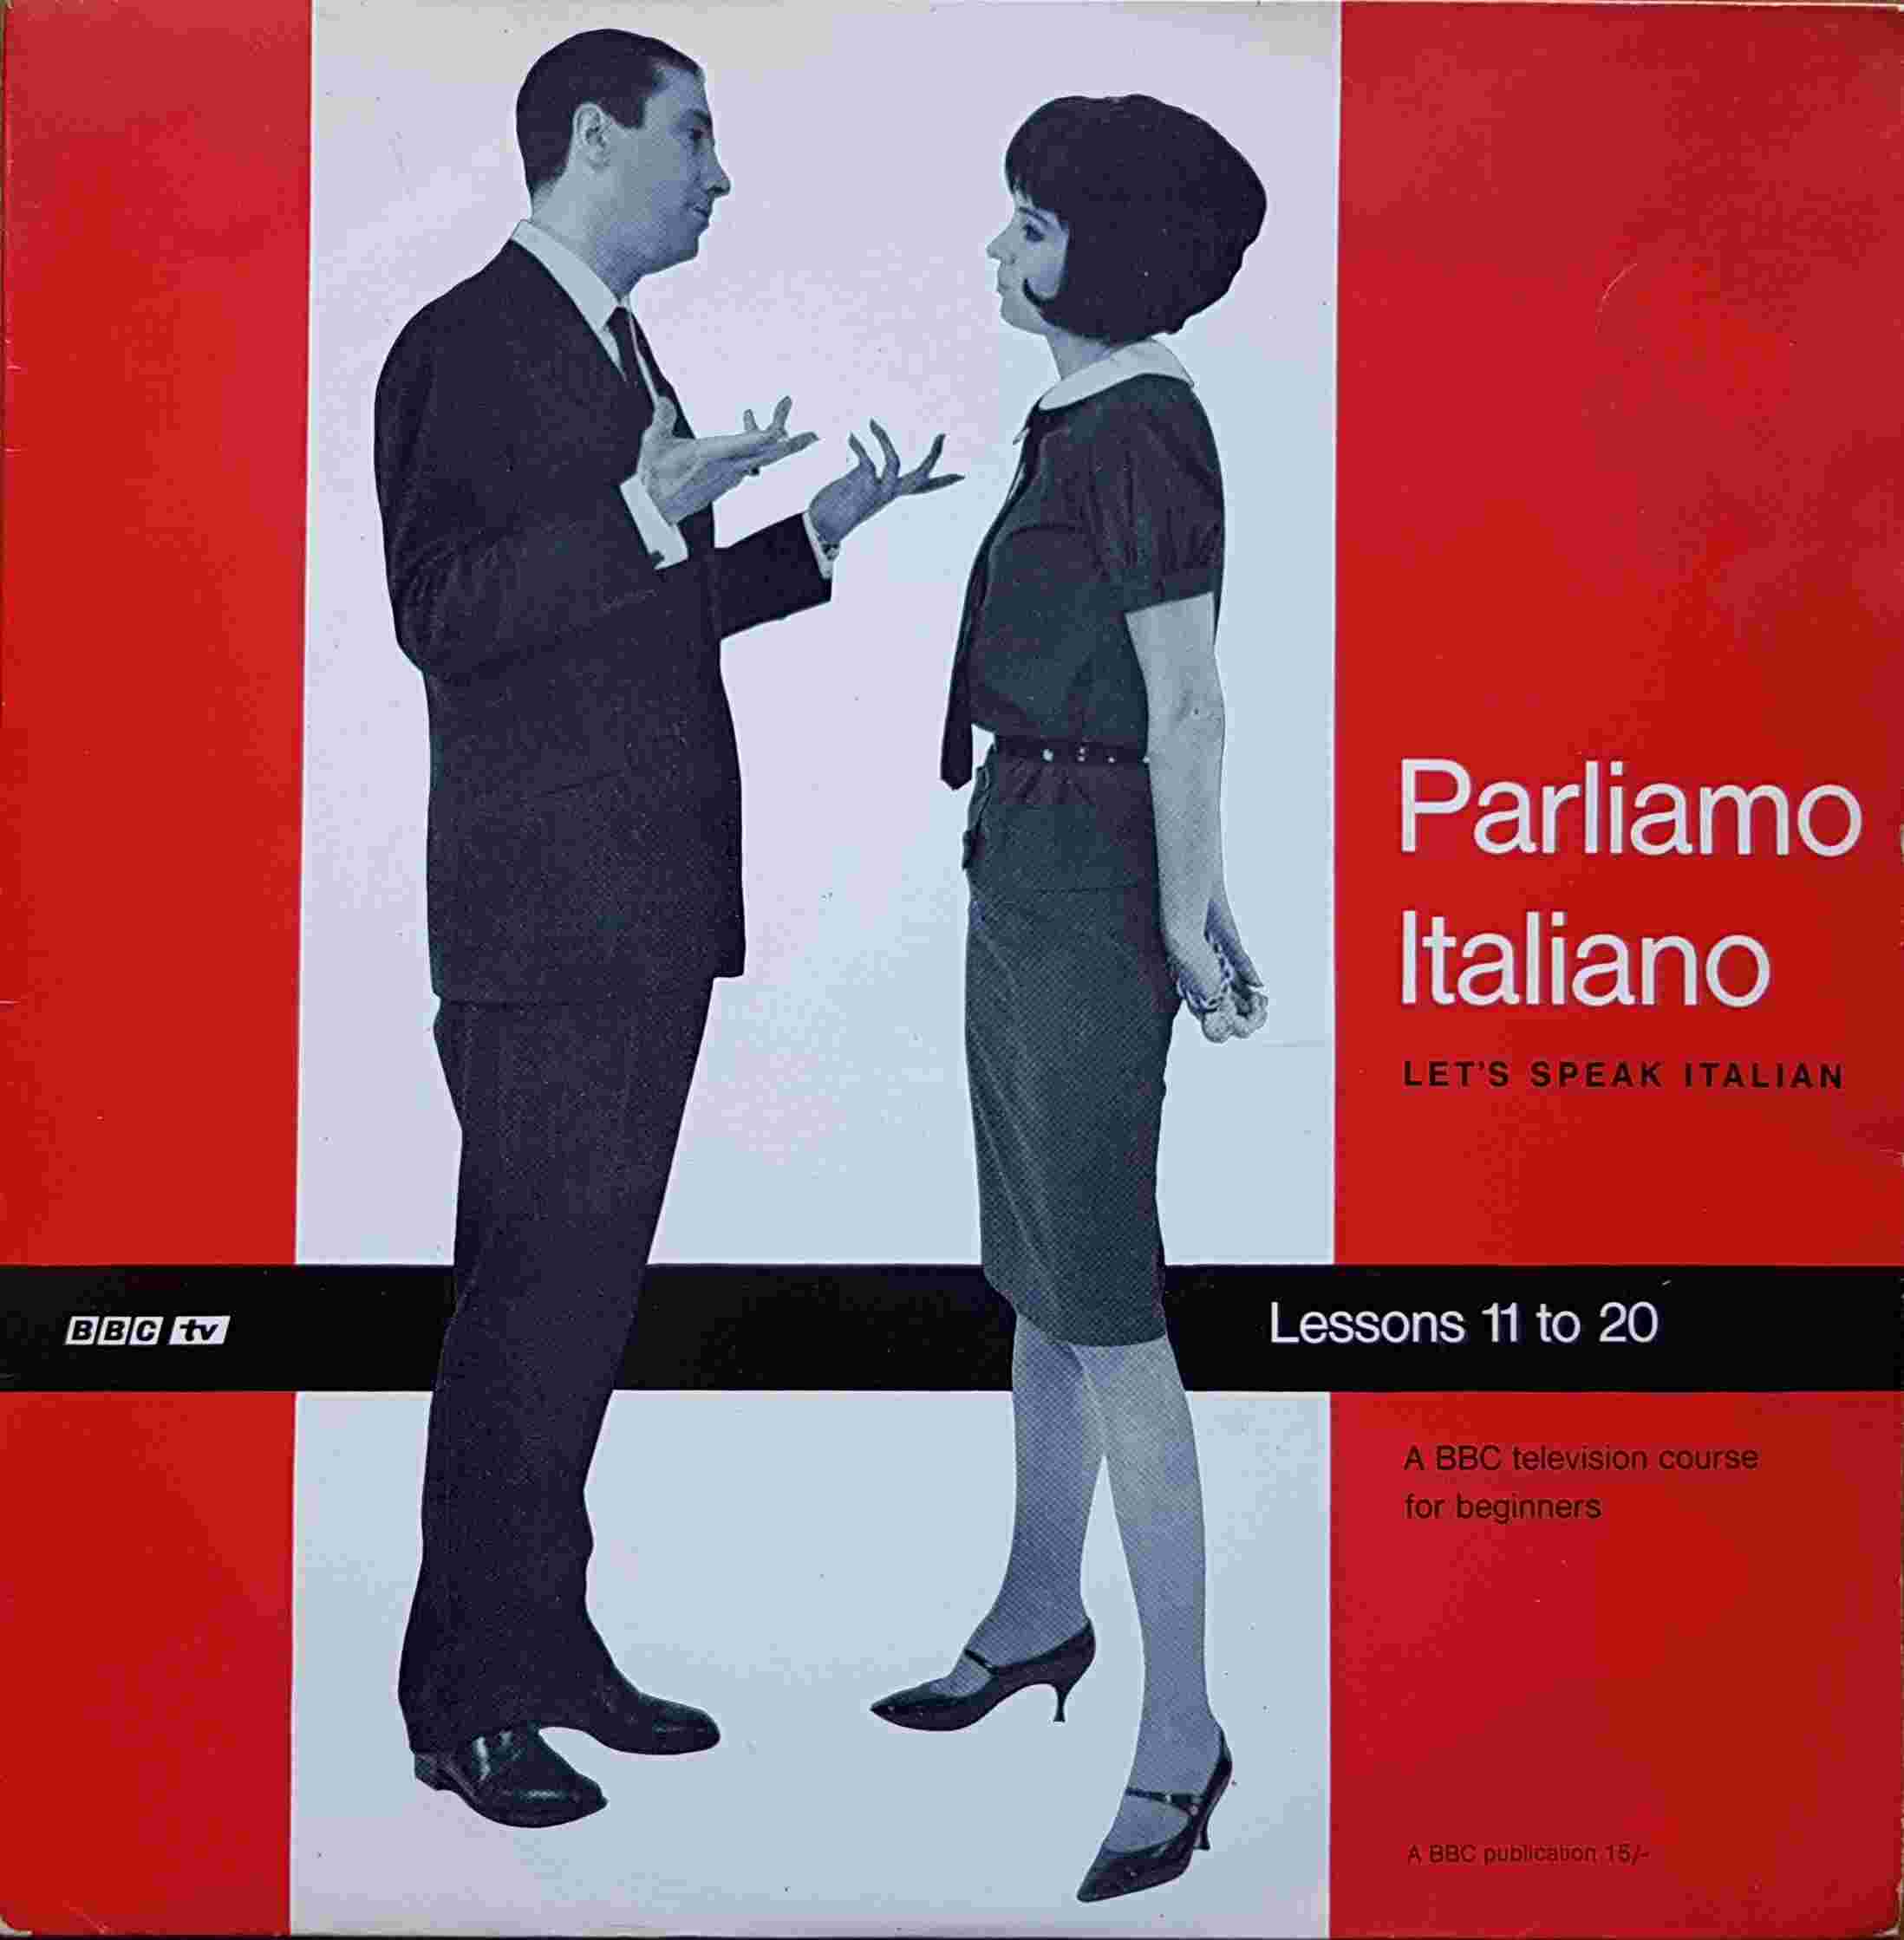 Picture of Parliamo Italiano - Let's Speak Italian lessons 11 - 20 by artist Toni Cerutti from the BBC albums - Records and Tapes library